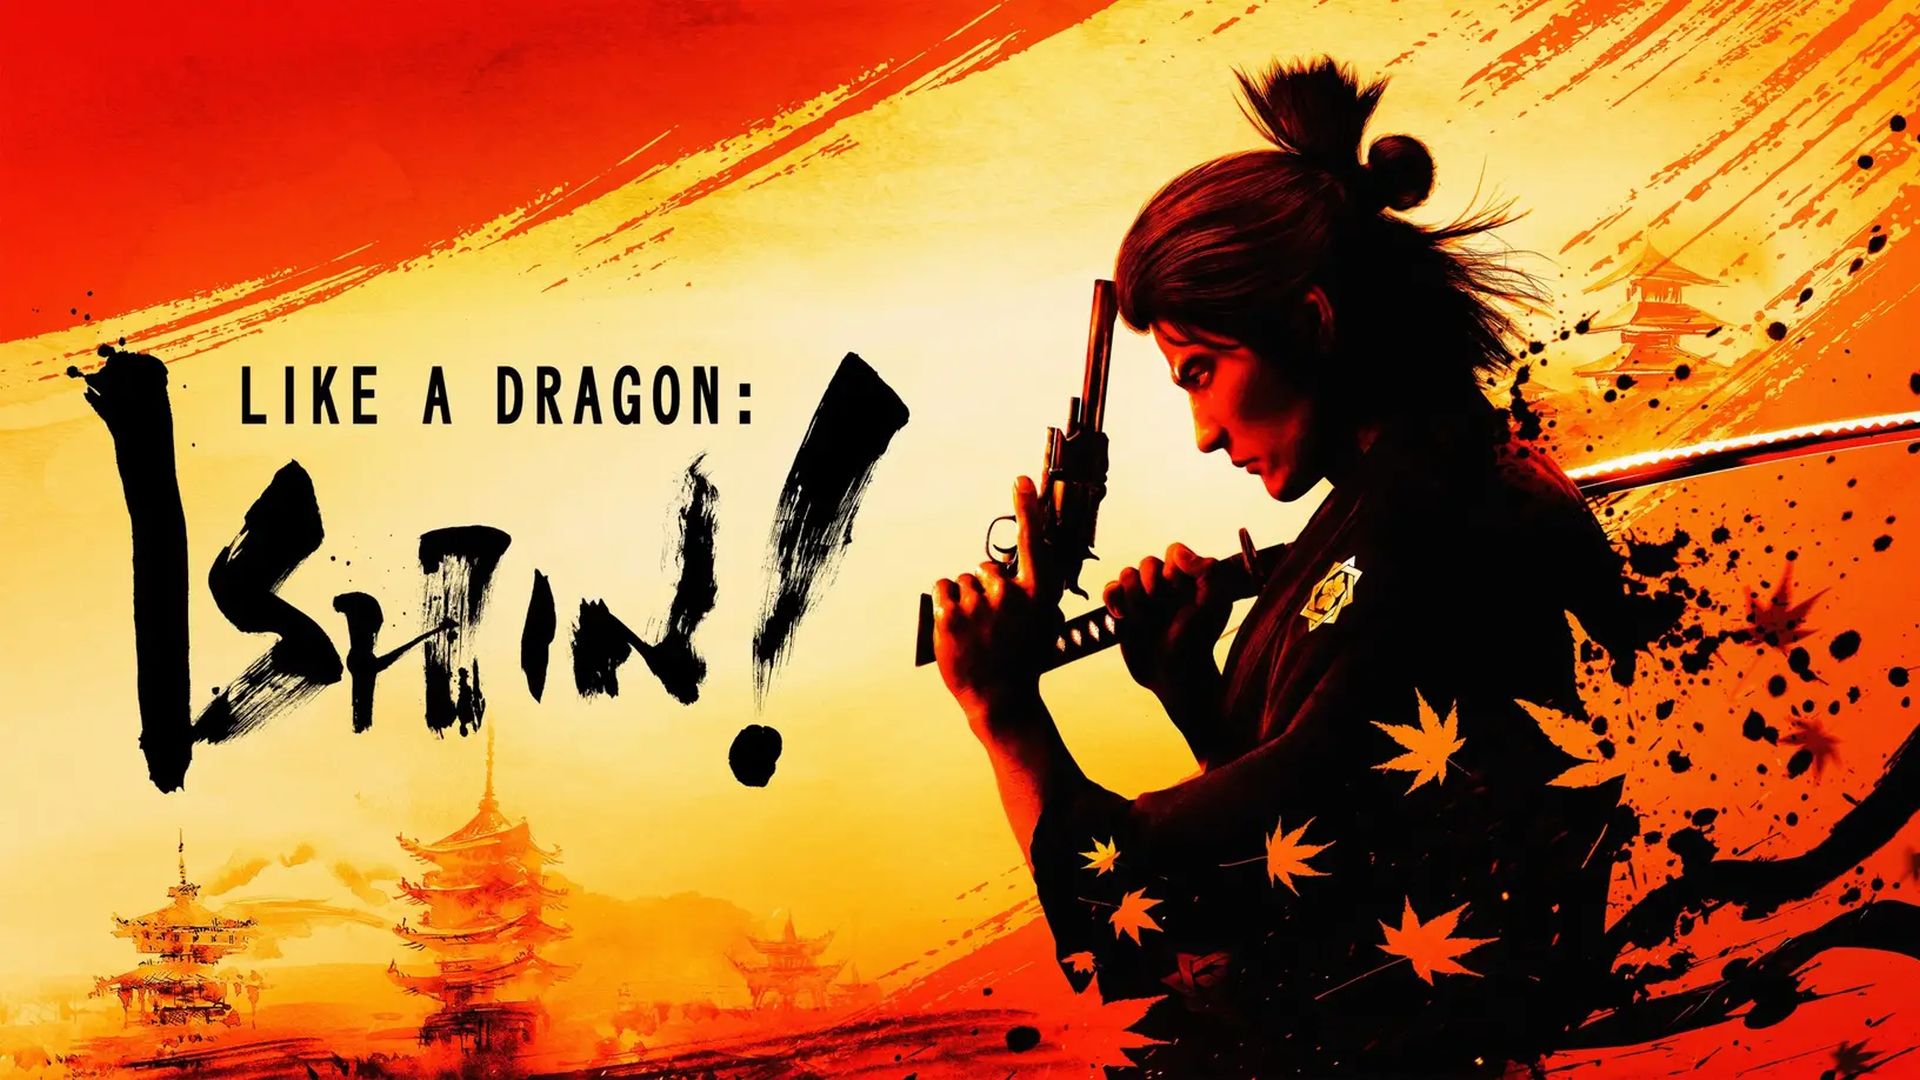 Like a Dragon: Ishin! PC Requirements Revealed, 60 GB
Install Space Required